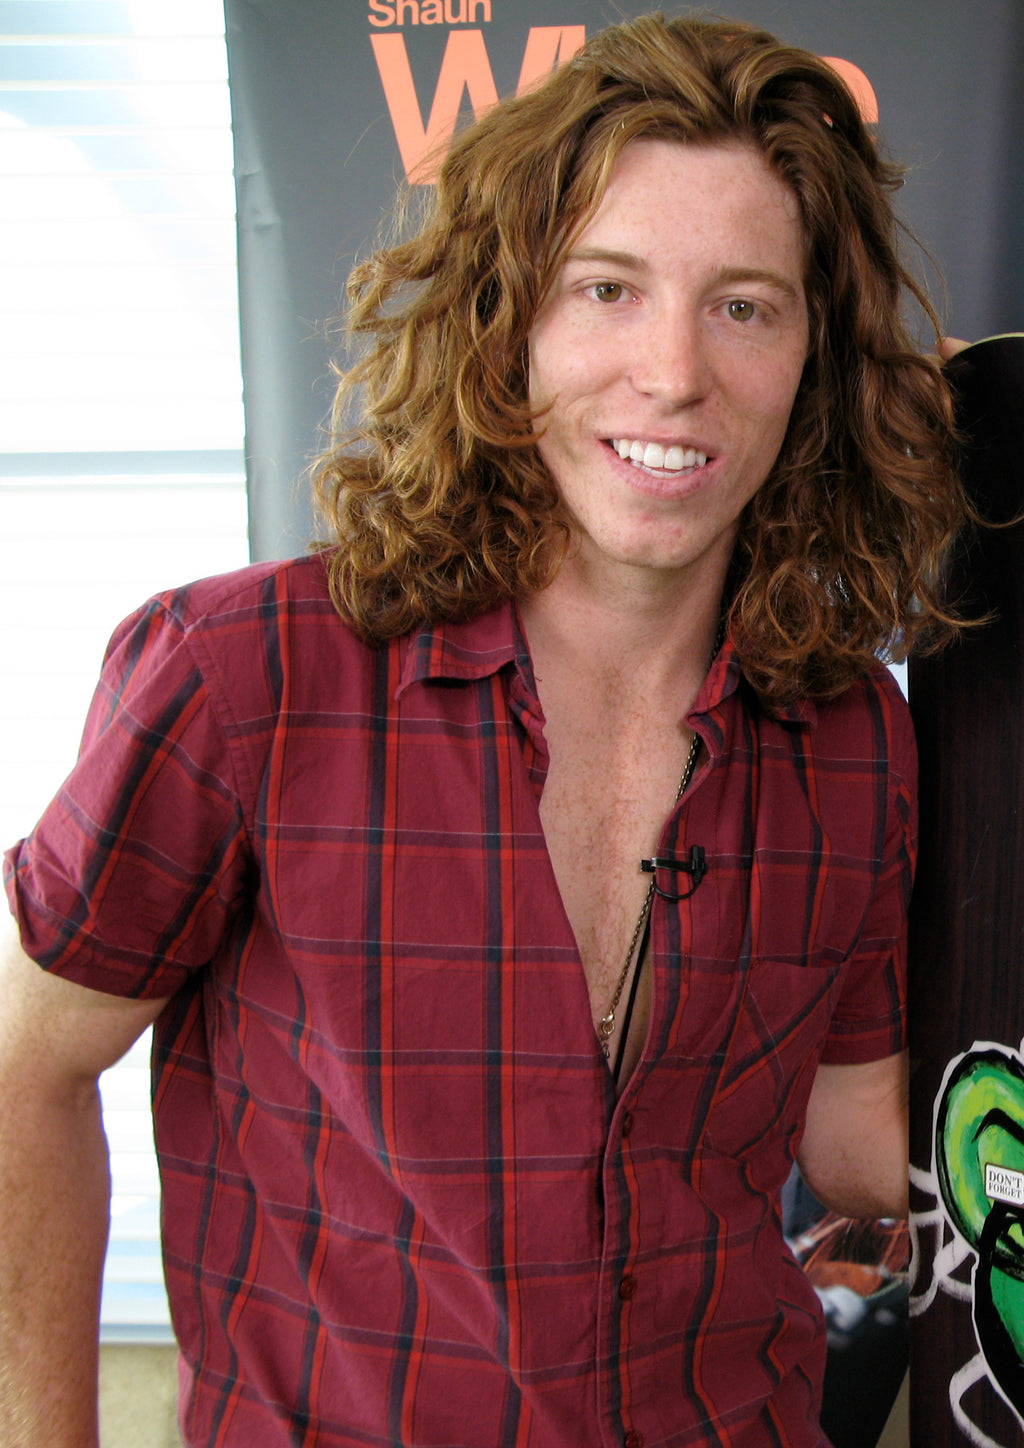 Shaun White A.K.A. The Flying Tomato Arrested